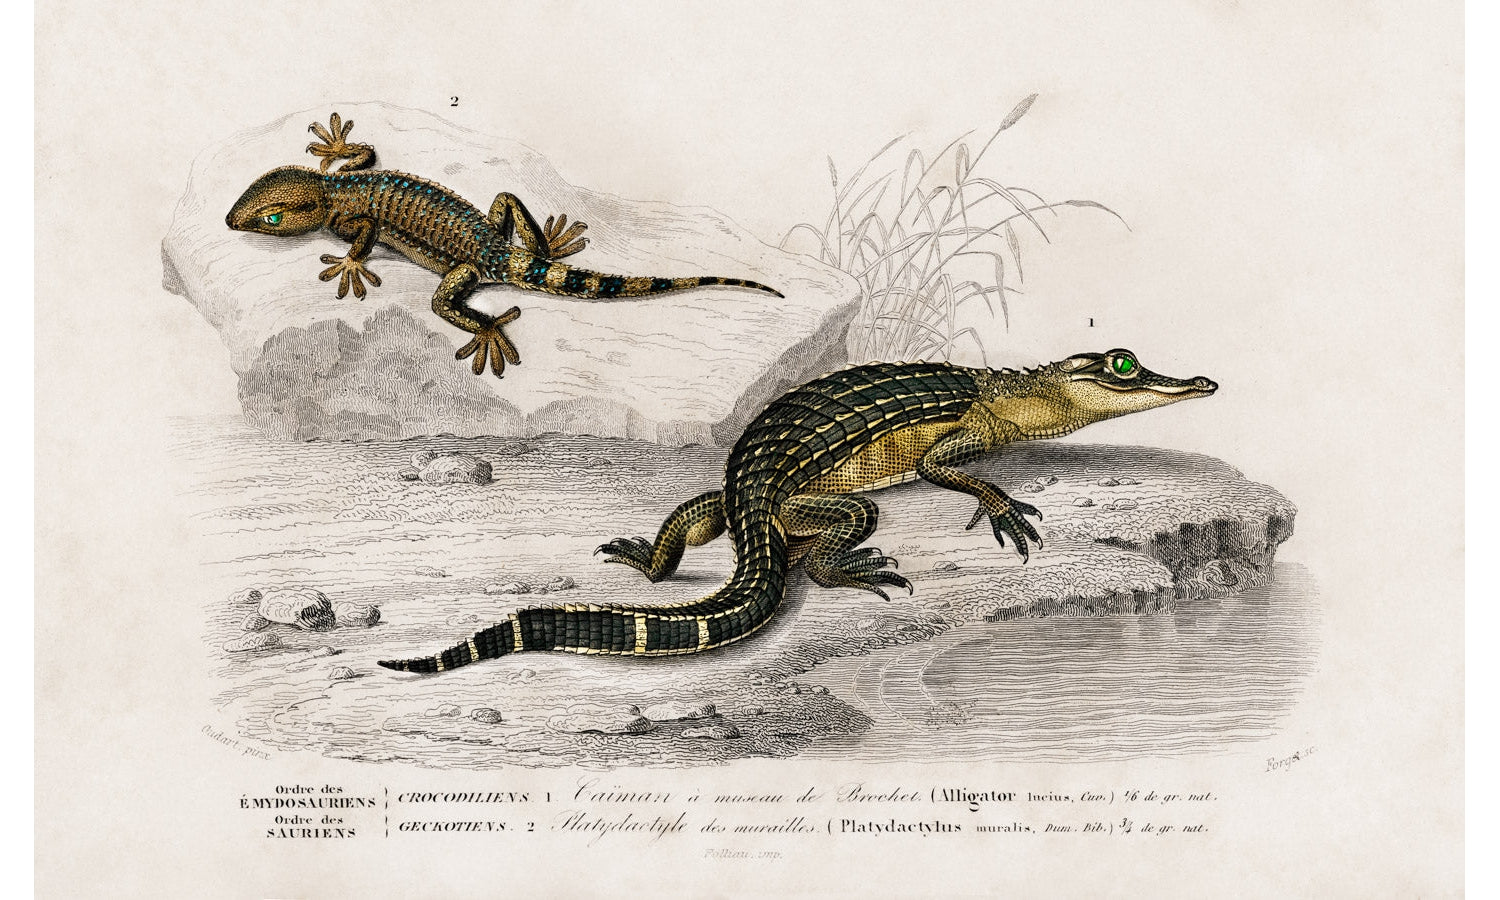 Alligator (Alligator incius) and Lilford'swall lizard (Podarcis lilfordi) illustrated by Charles Dessalines, poster PS275